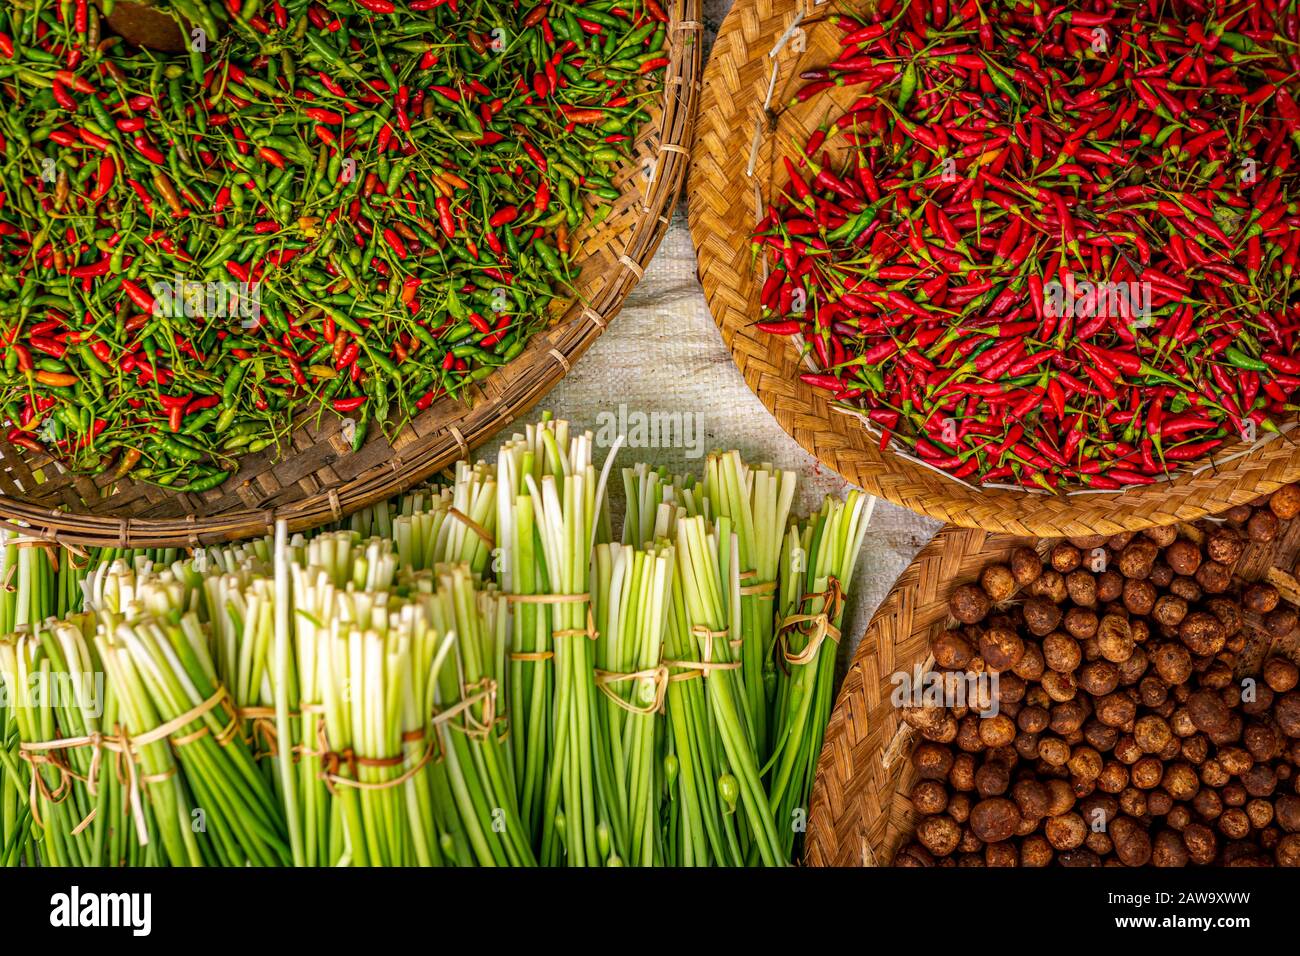 Freshly harvested spicy chili pepper and vegetables Stock Photo